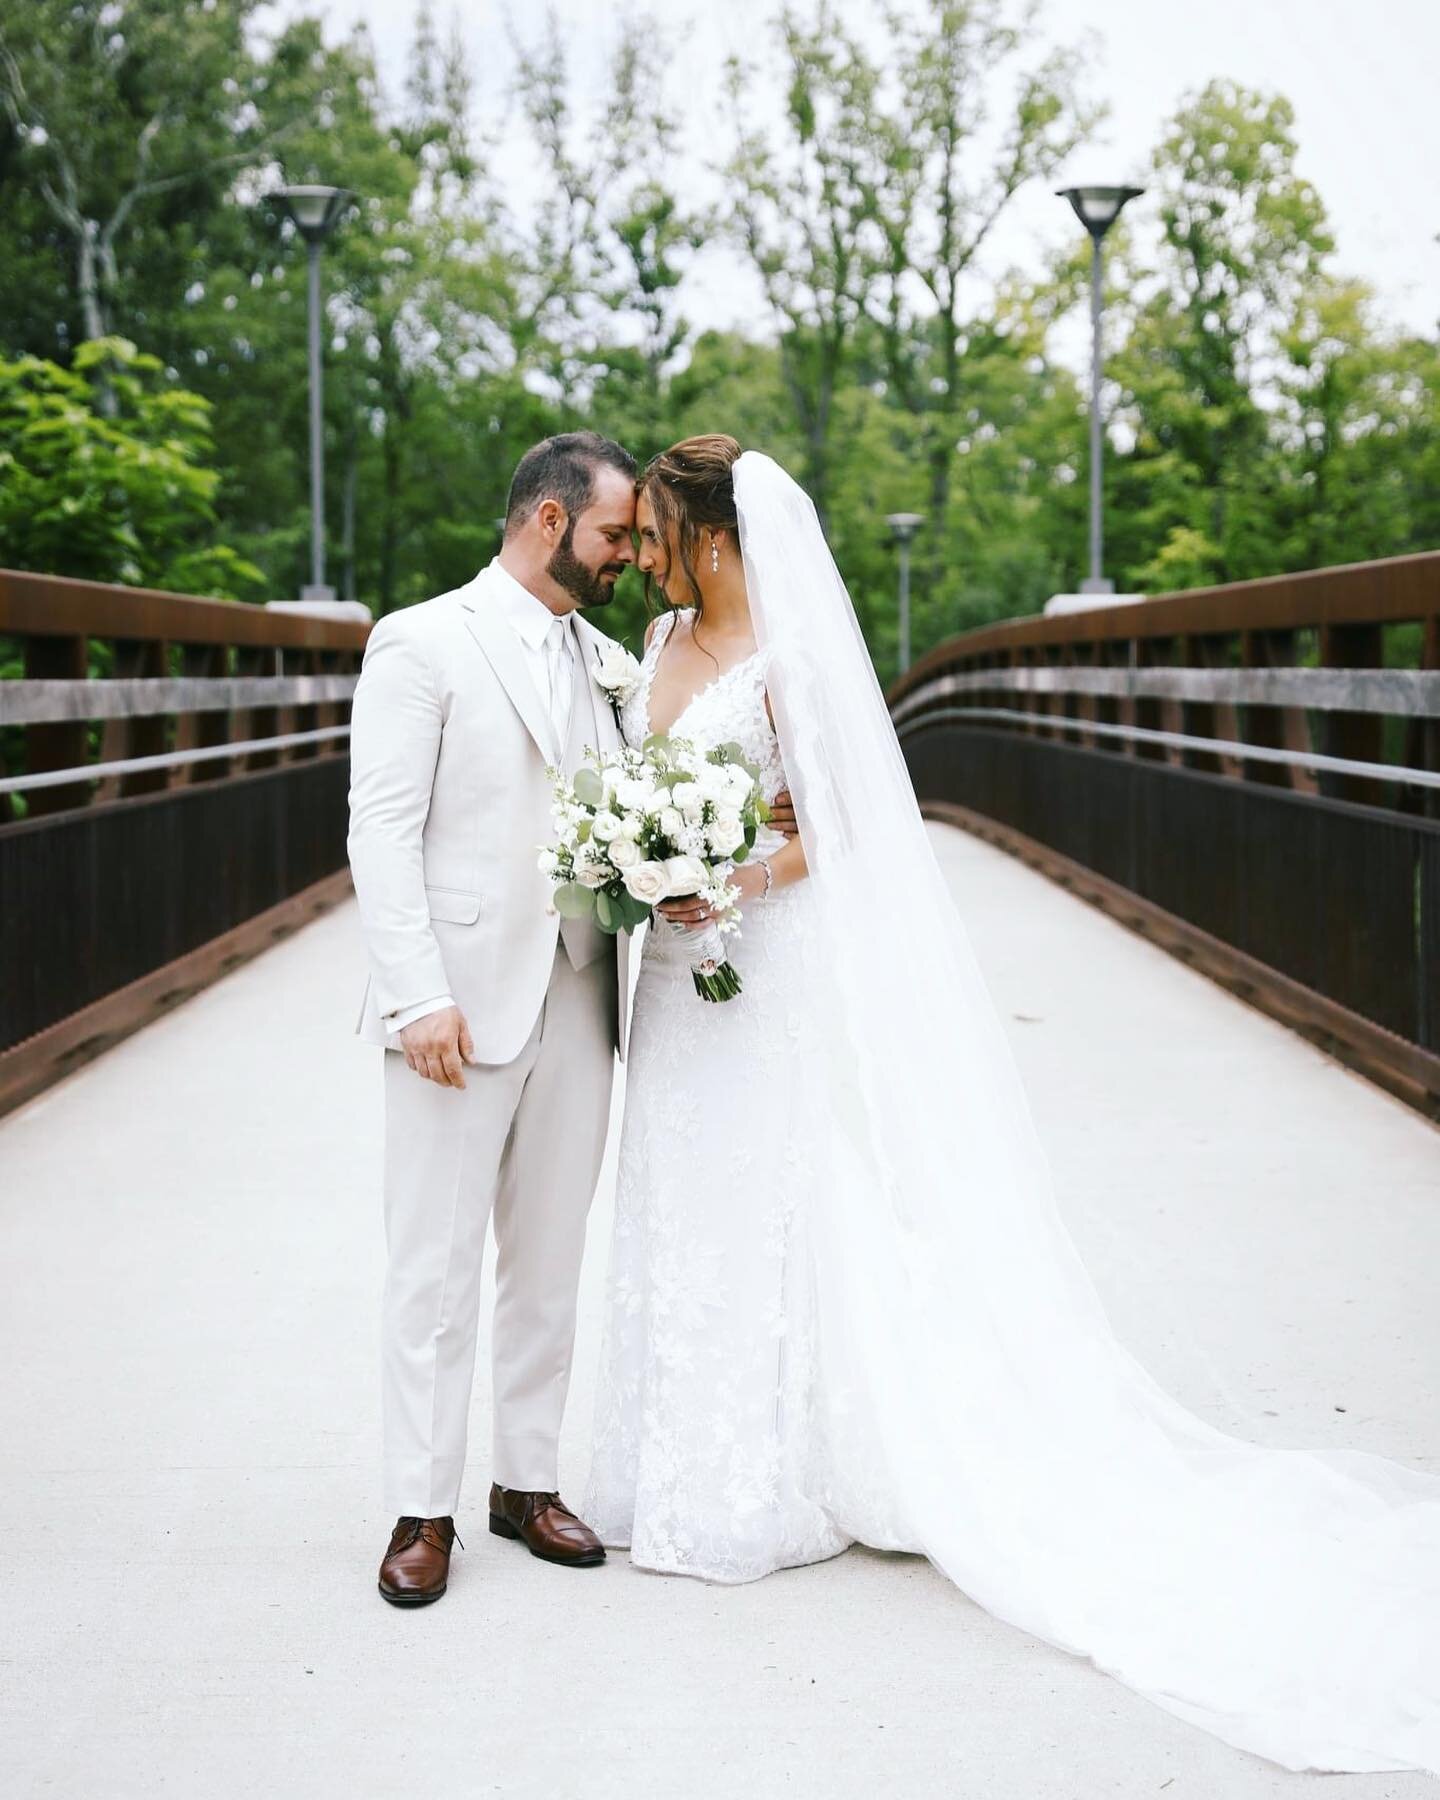 Congratulations Dave and Vivian! Their day was perfect at St. John Greek Orthodox Church and ending the party at Andiamo Banquet Center Warren. Tradition says rain is { G O O D  L U C K} on a wedding day. Dave and Vivian's day started with some sprin